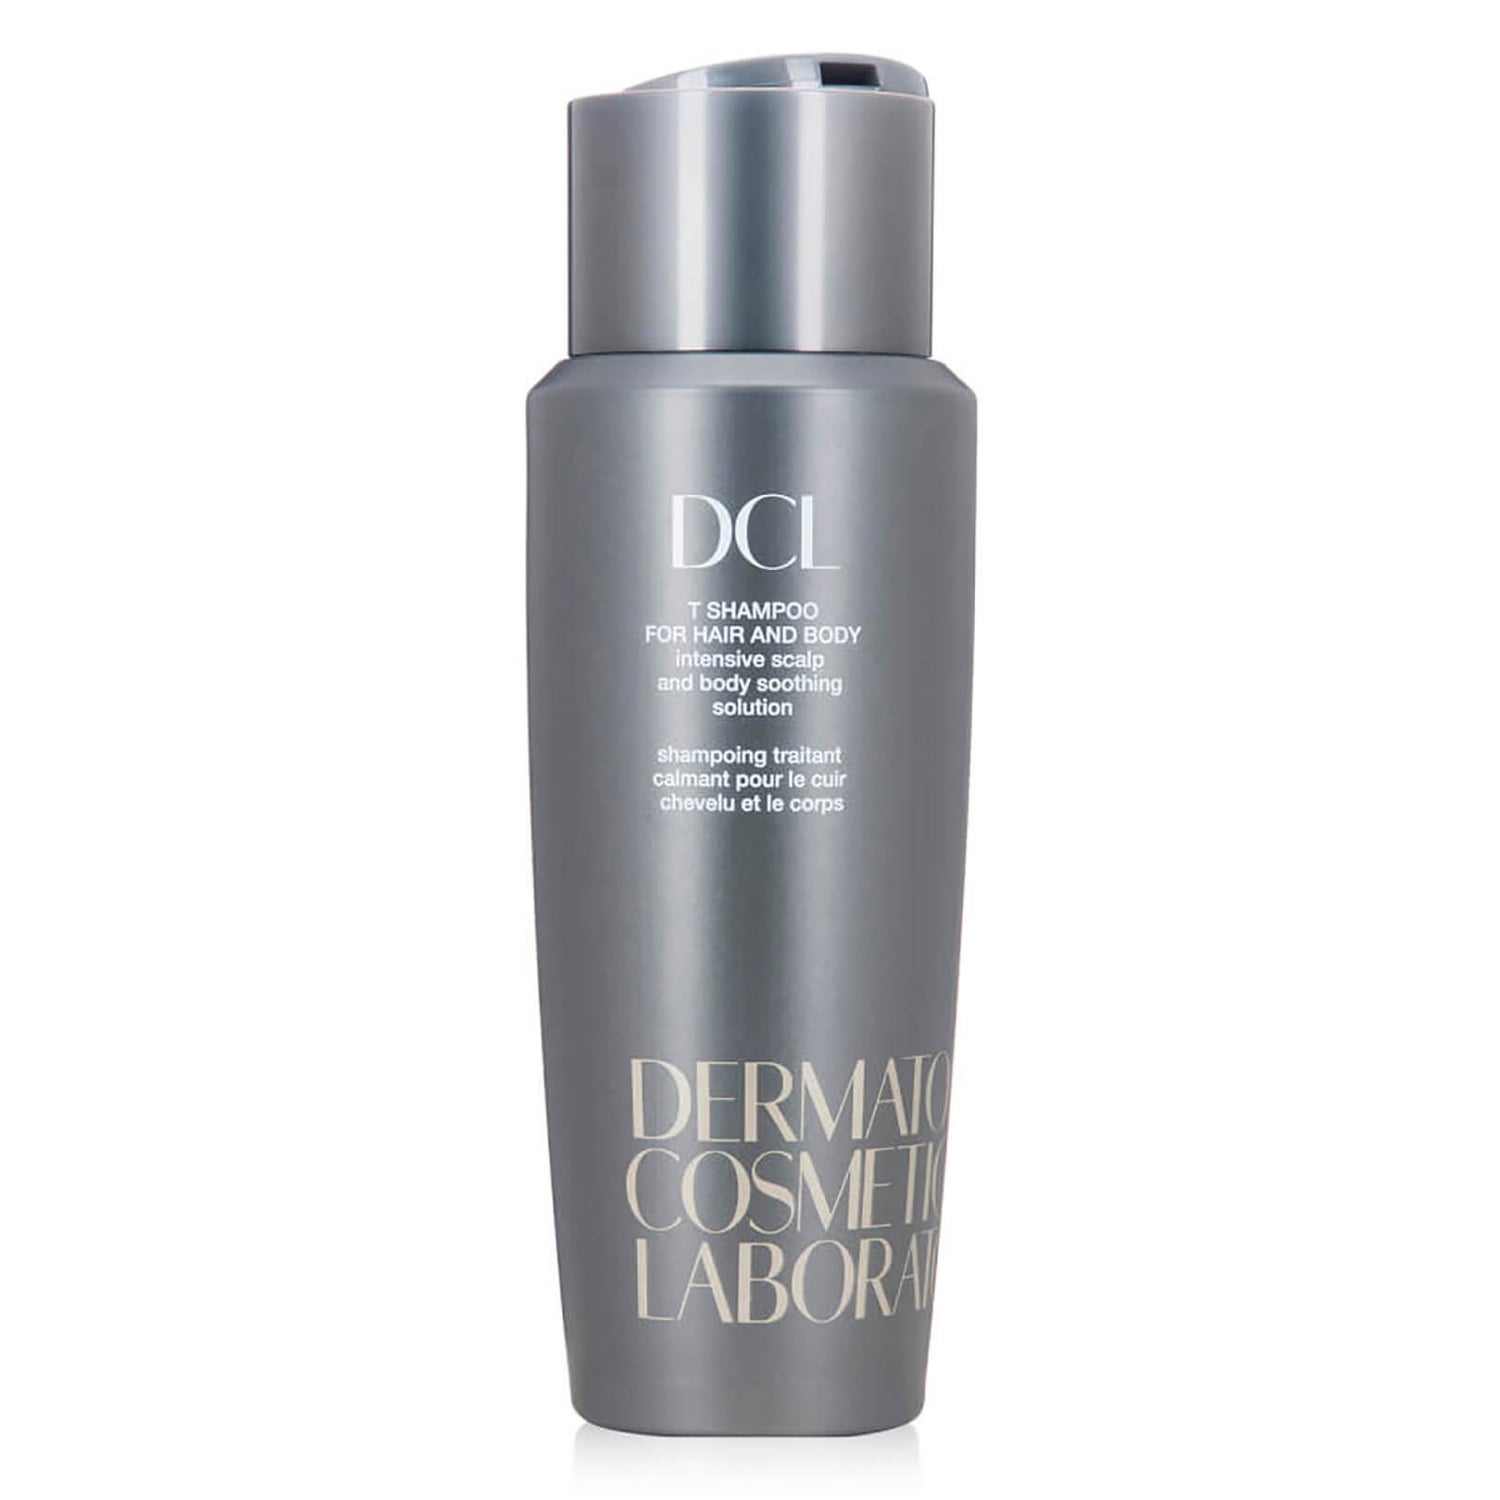 DCL Dermatologic Cosmetic Laboratories T Shampoo for Hair and Body (10.1 fl. oz.)